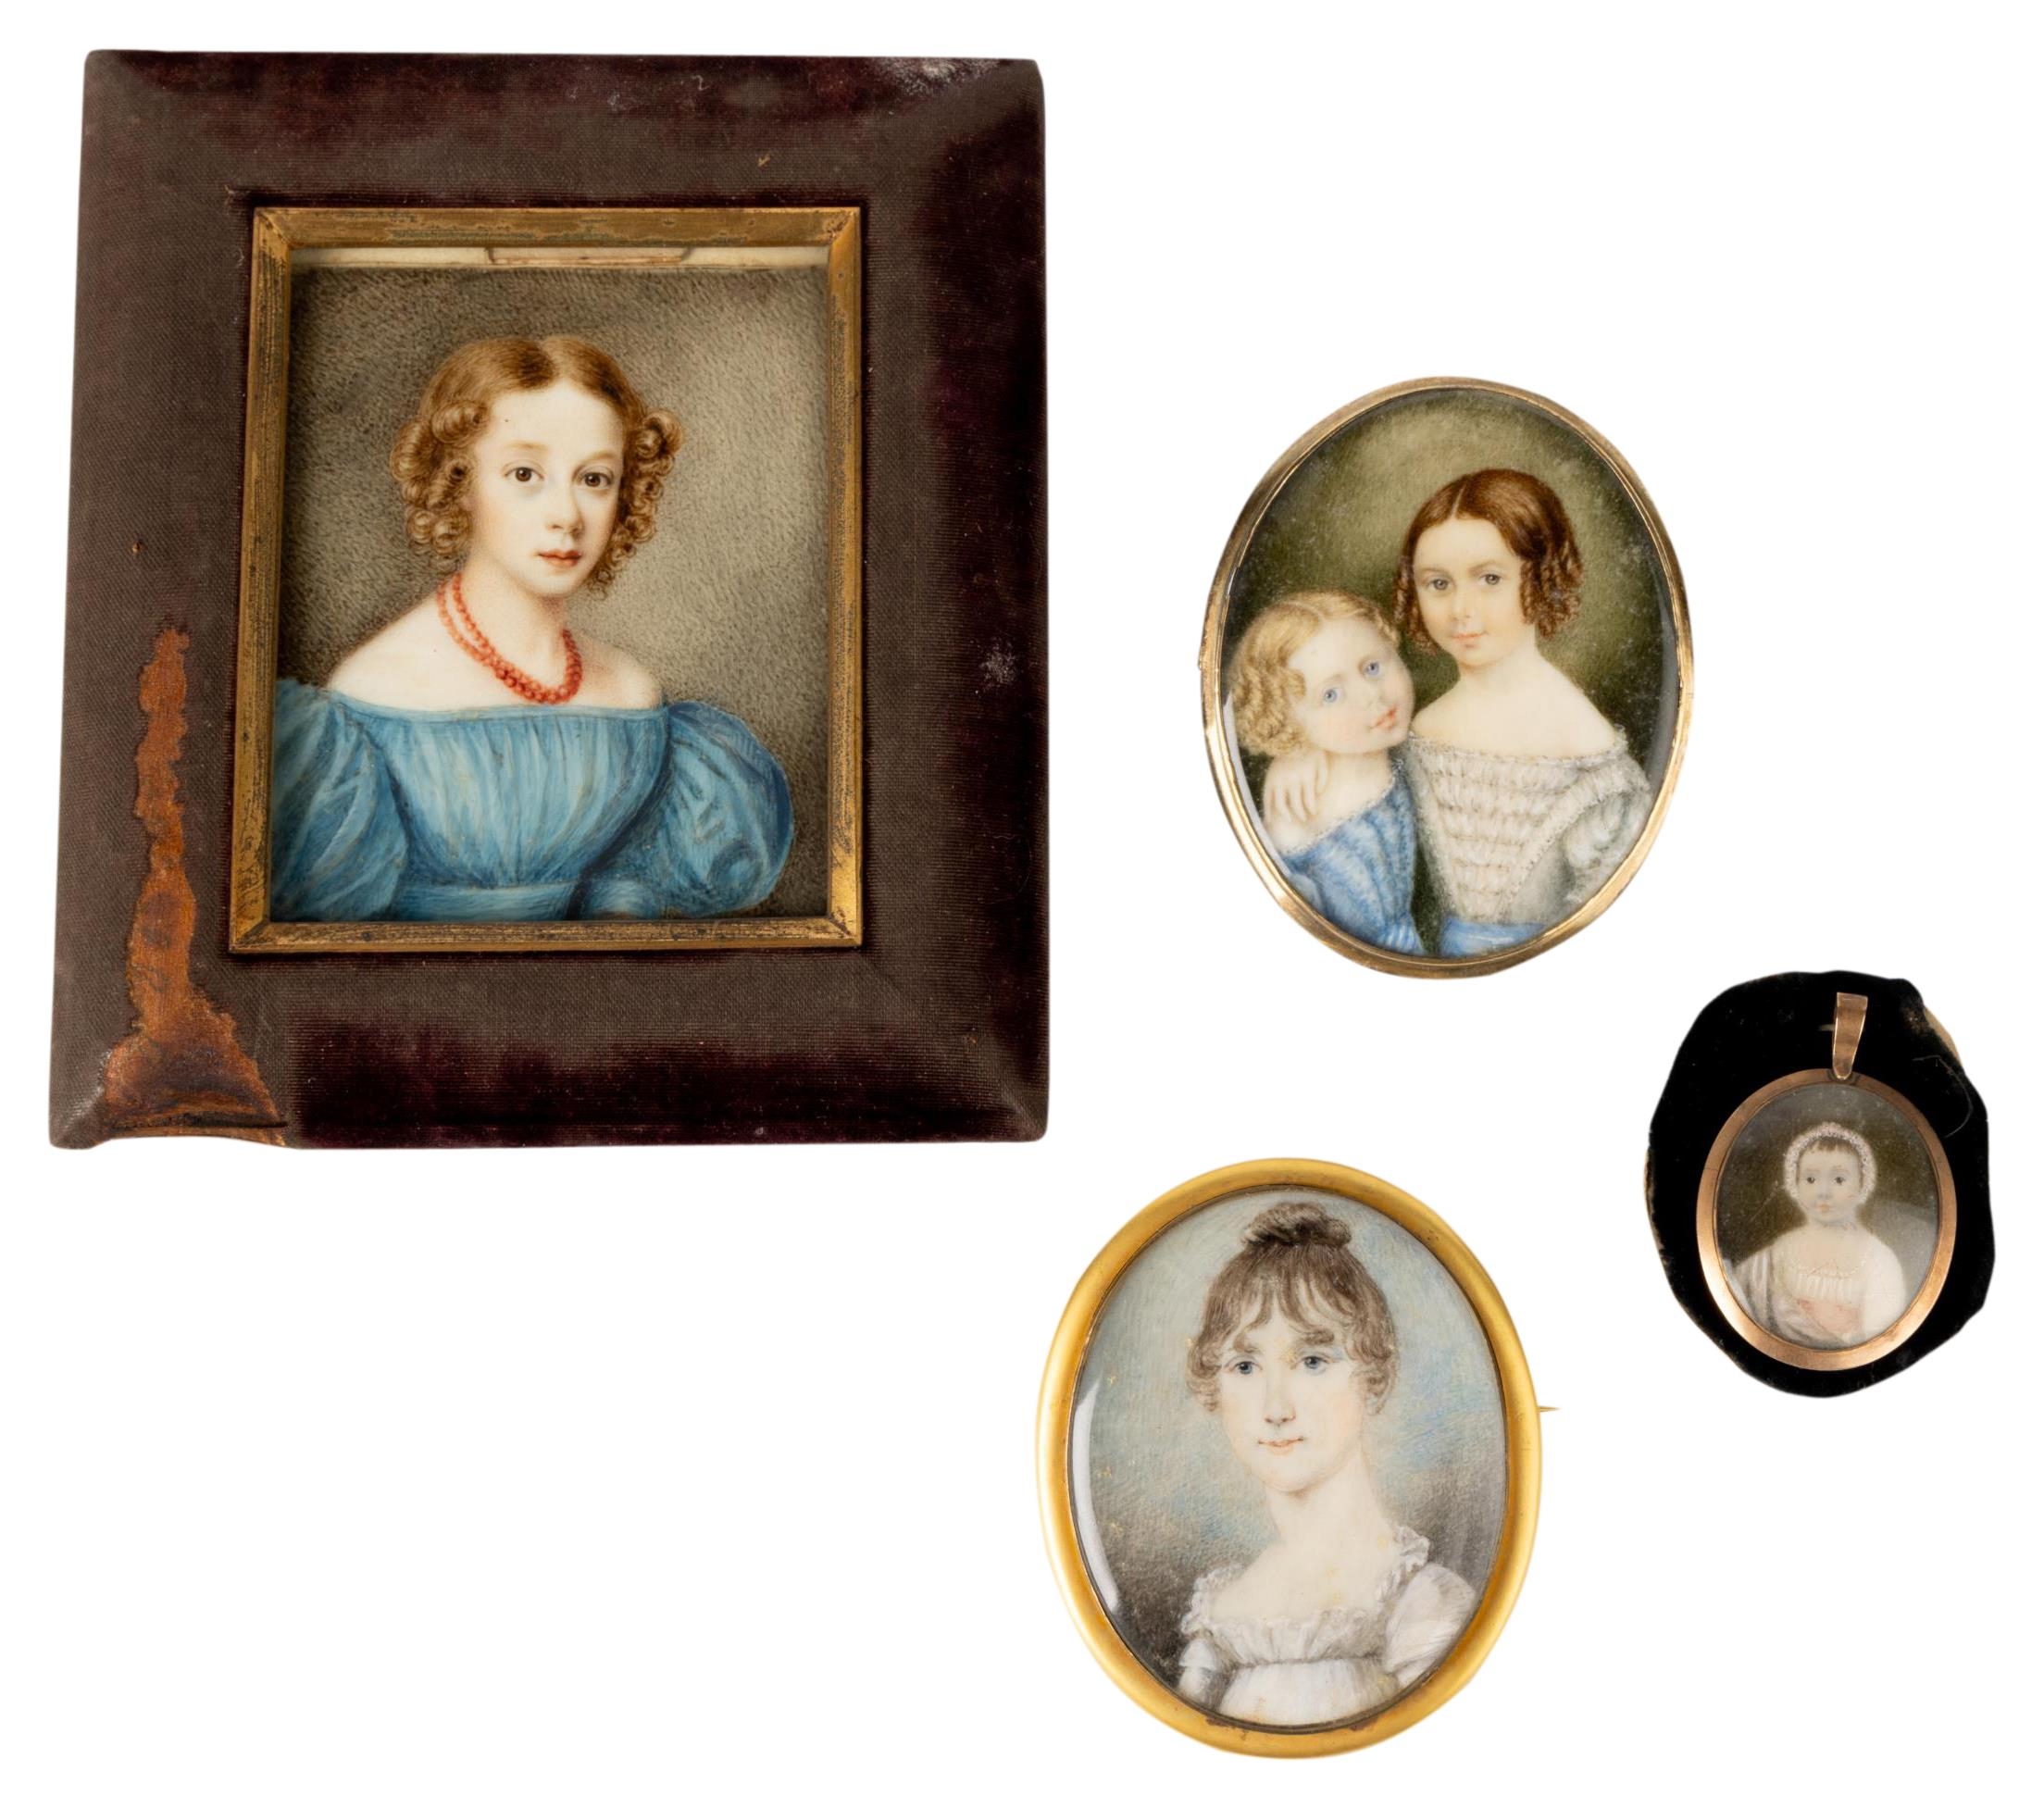 A REGENCY PORTRAIT MINIATURE OF TWO YOUNG GIRLS, the reverse of the case with a woven hair memorial,